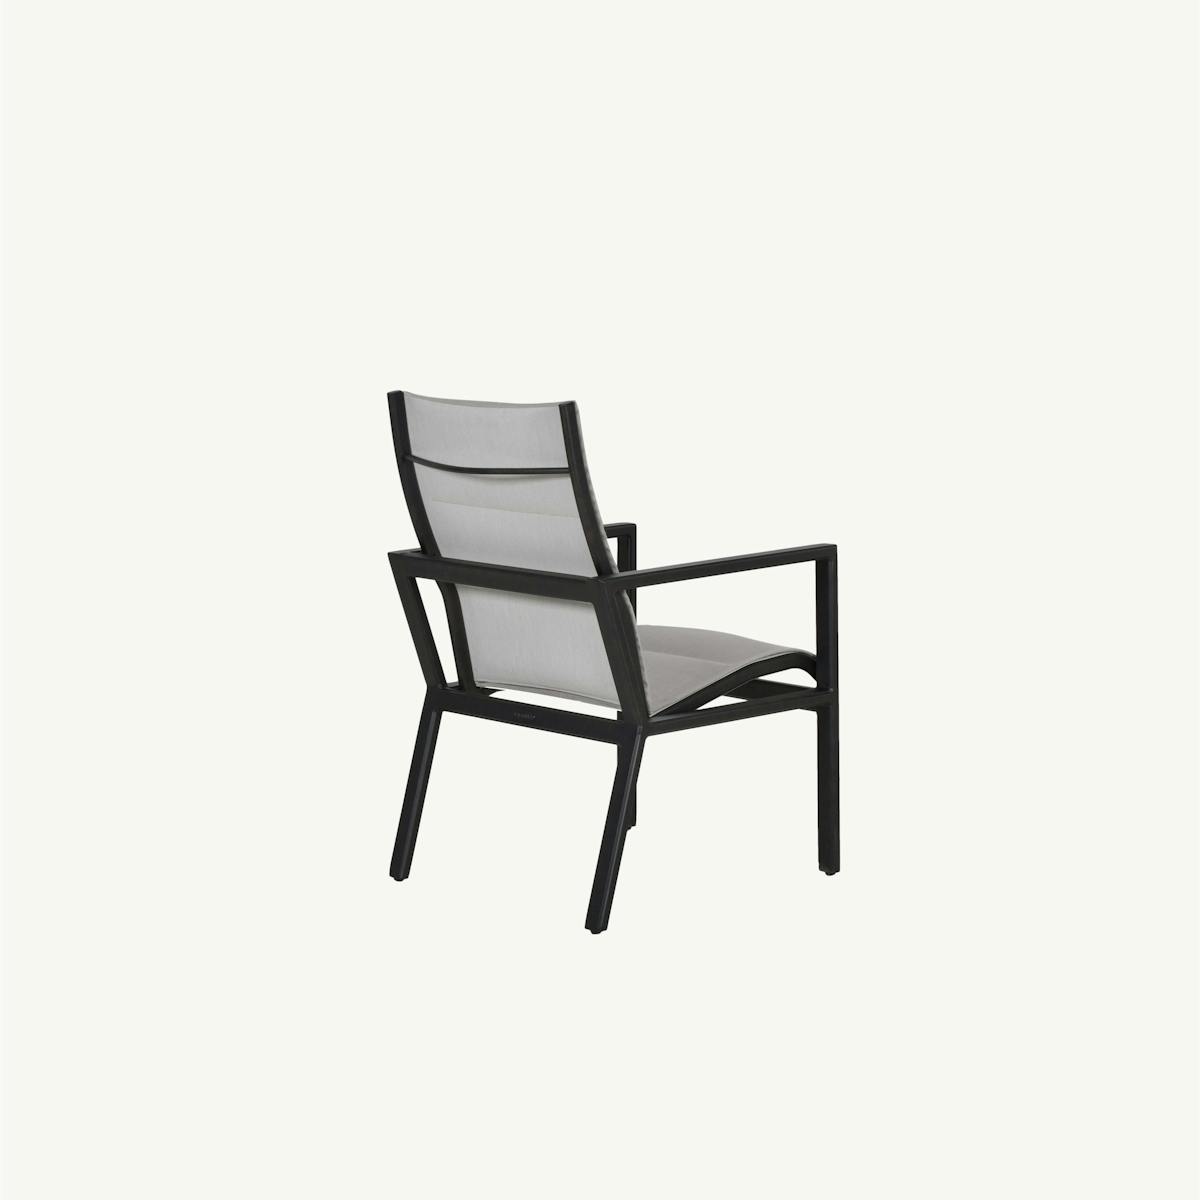 Saxton Padded Sling Dining Chair - Castelle